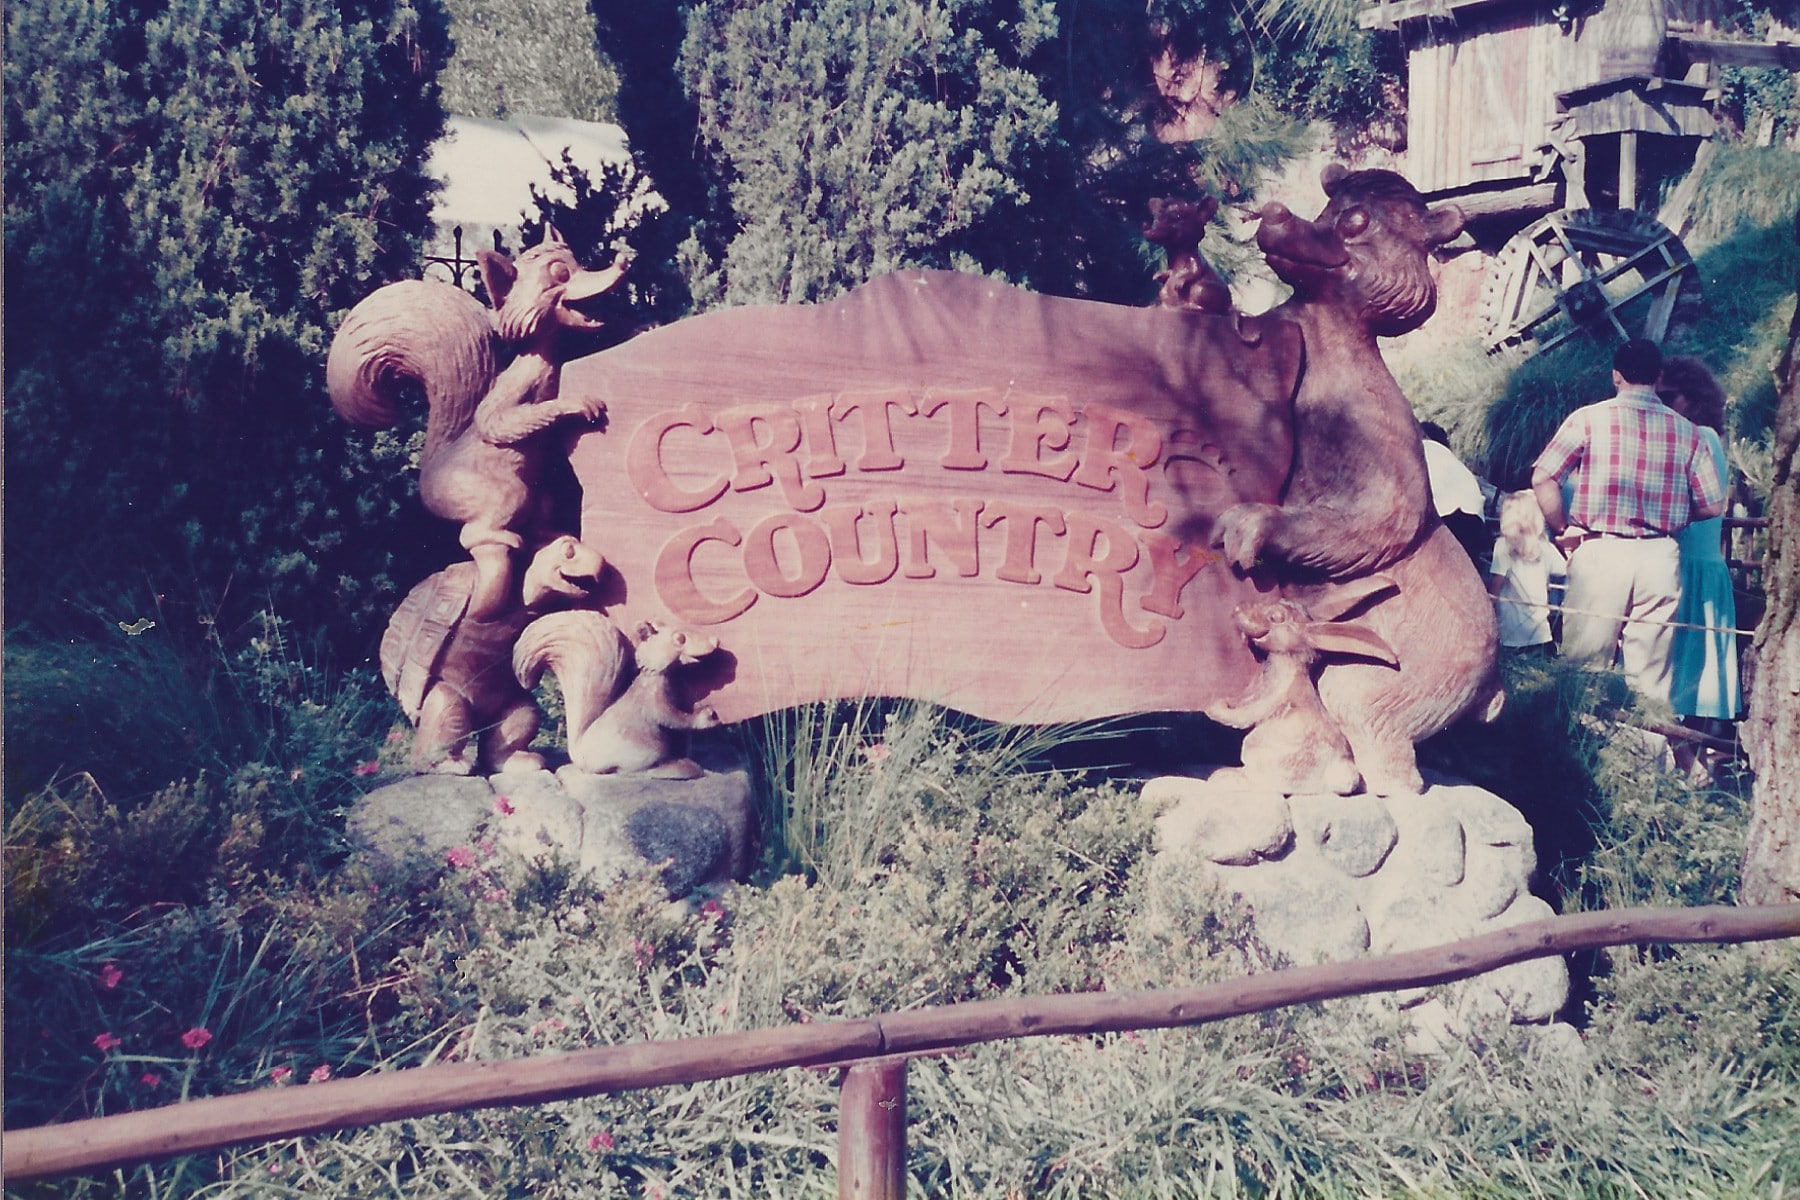 The brand new Critter Country sign